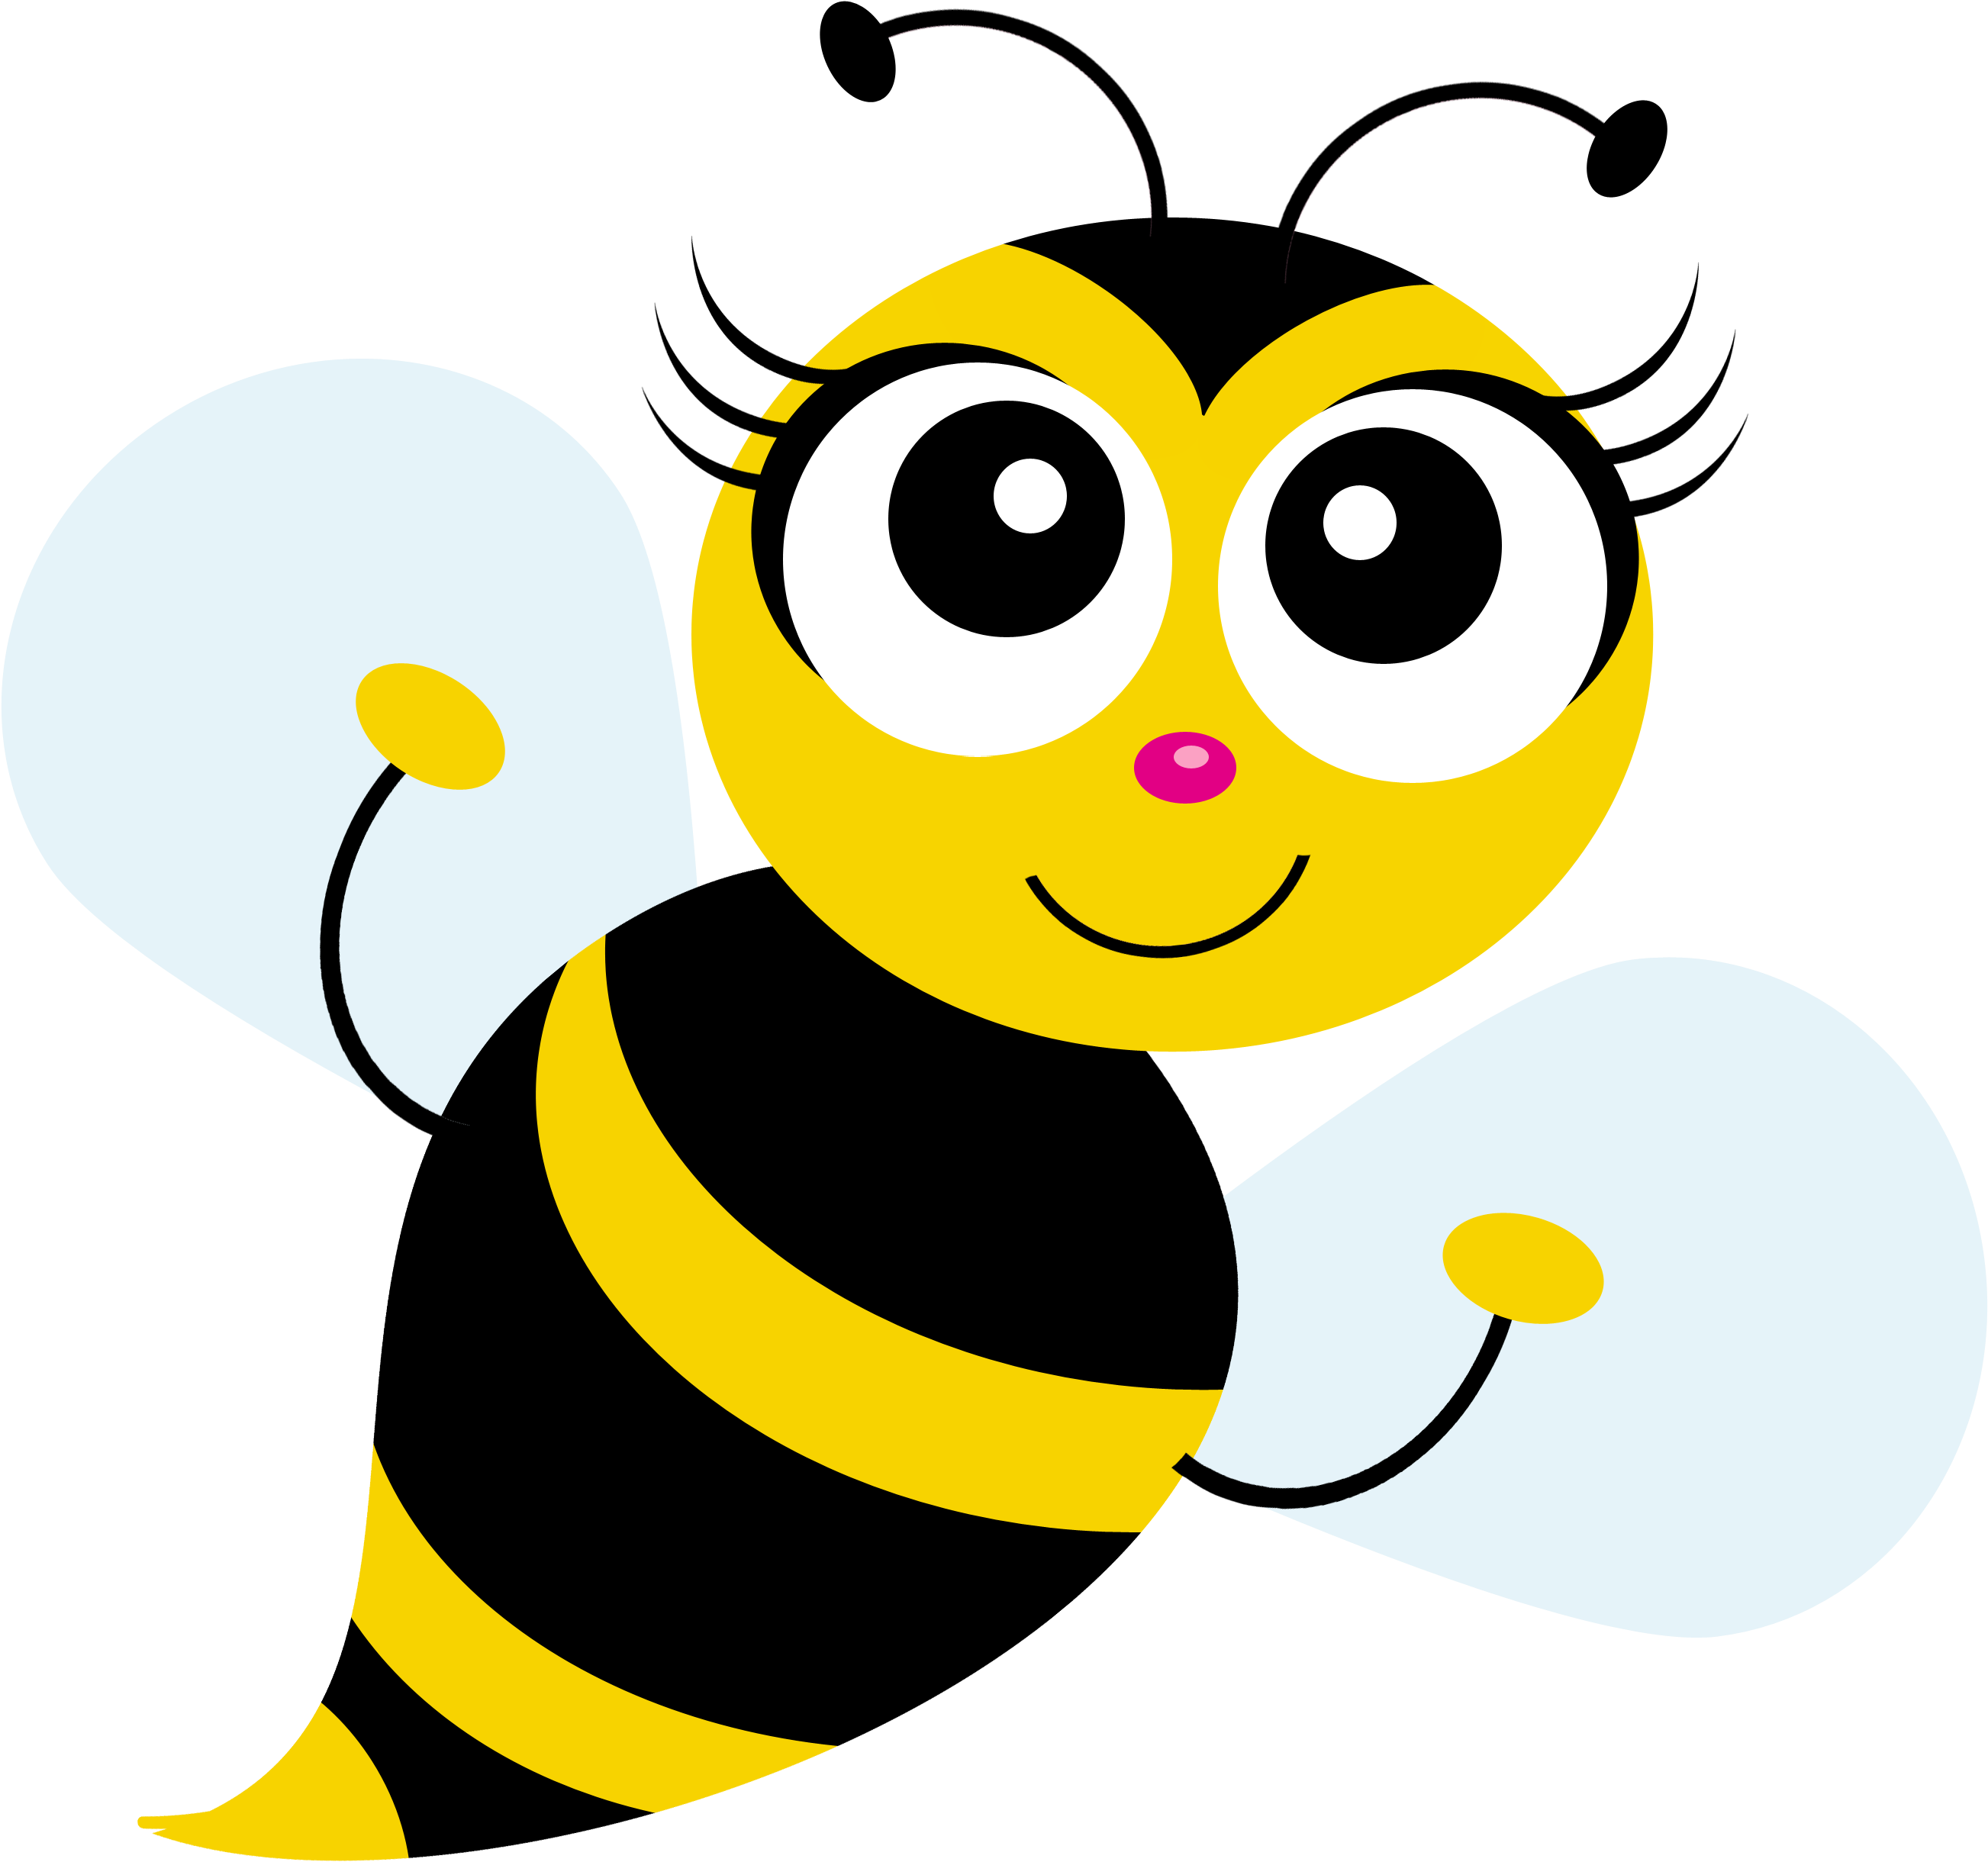 Download and share clipart about Western Honey Bee Drawing Party Insect - A...